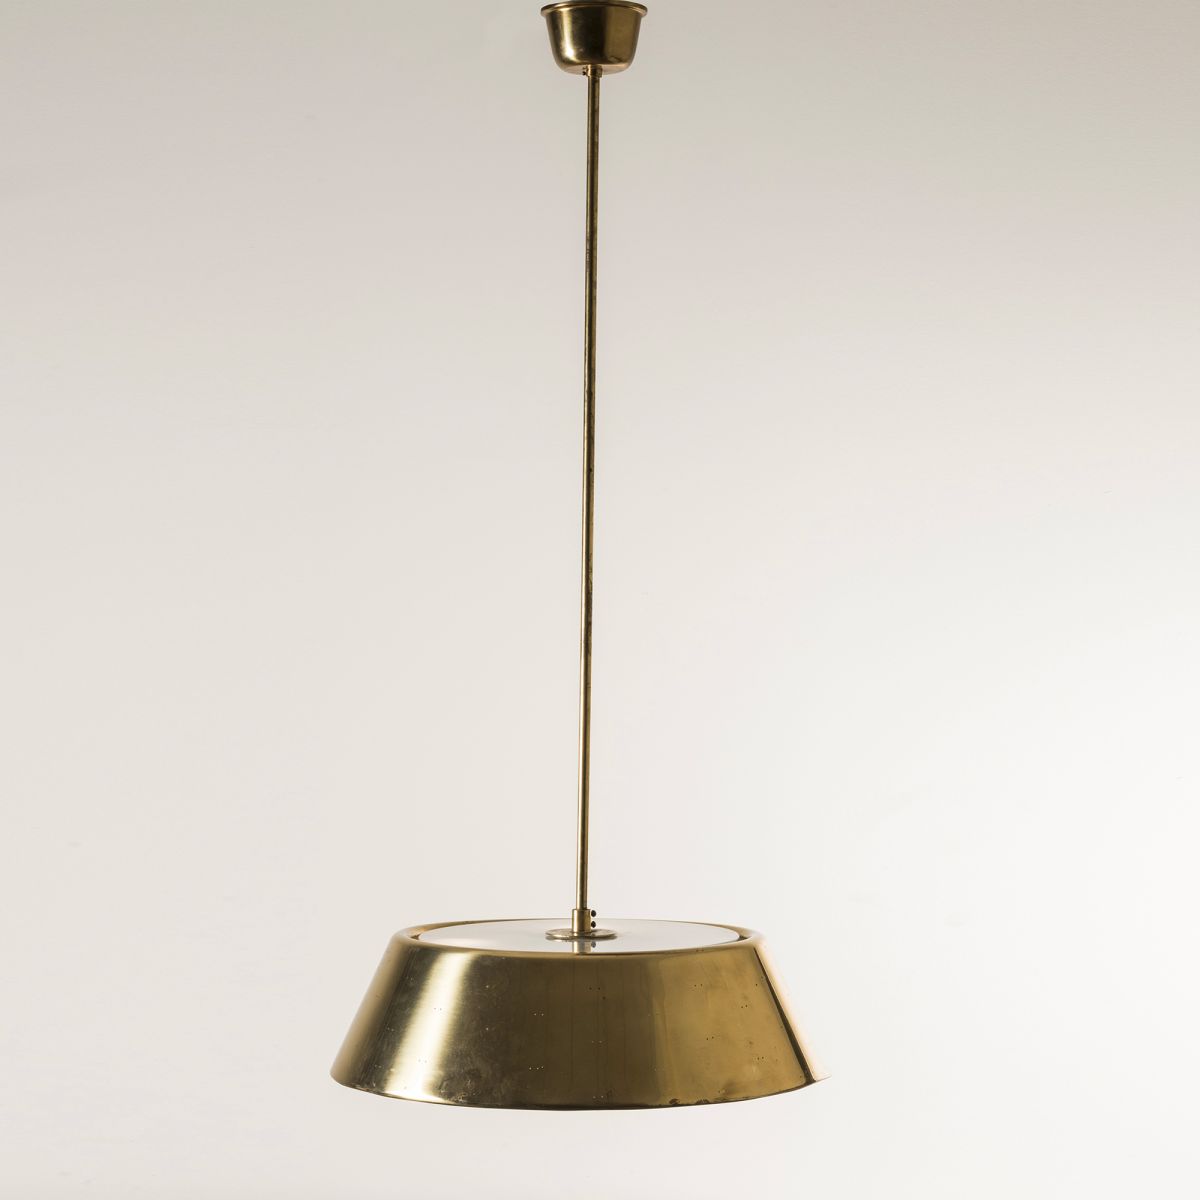 Two ceiling lamps Paavo Tynell pic-1